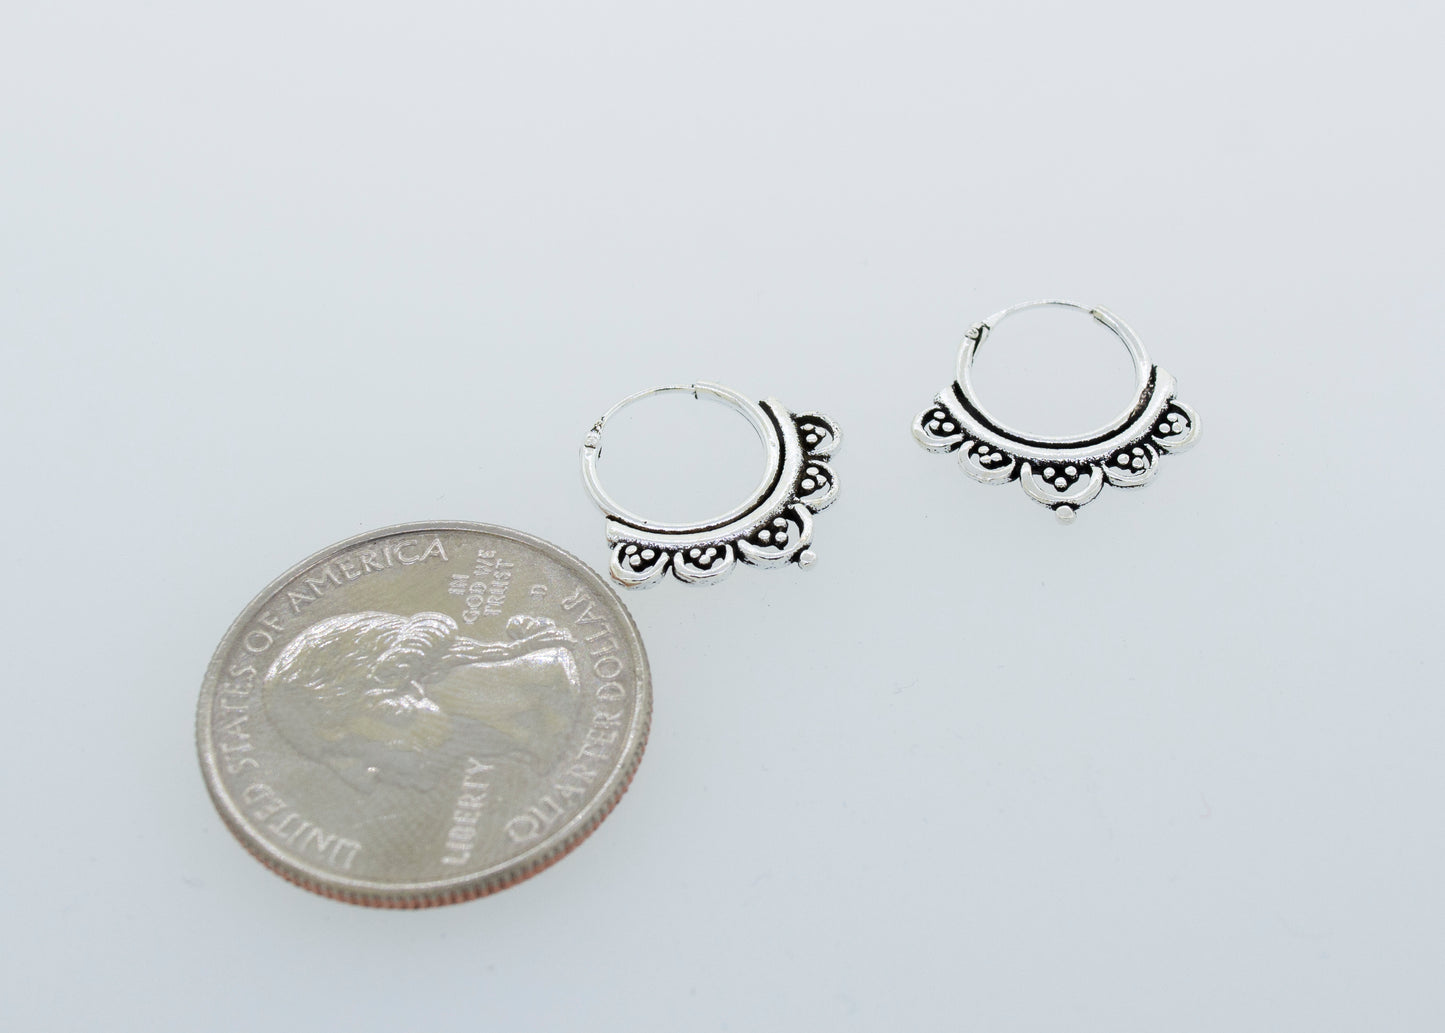 A pair of Super Silver Small Beautiful Freestyle Hoop Earrings next to a quarter.